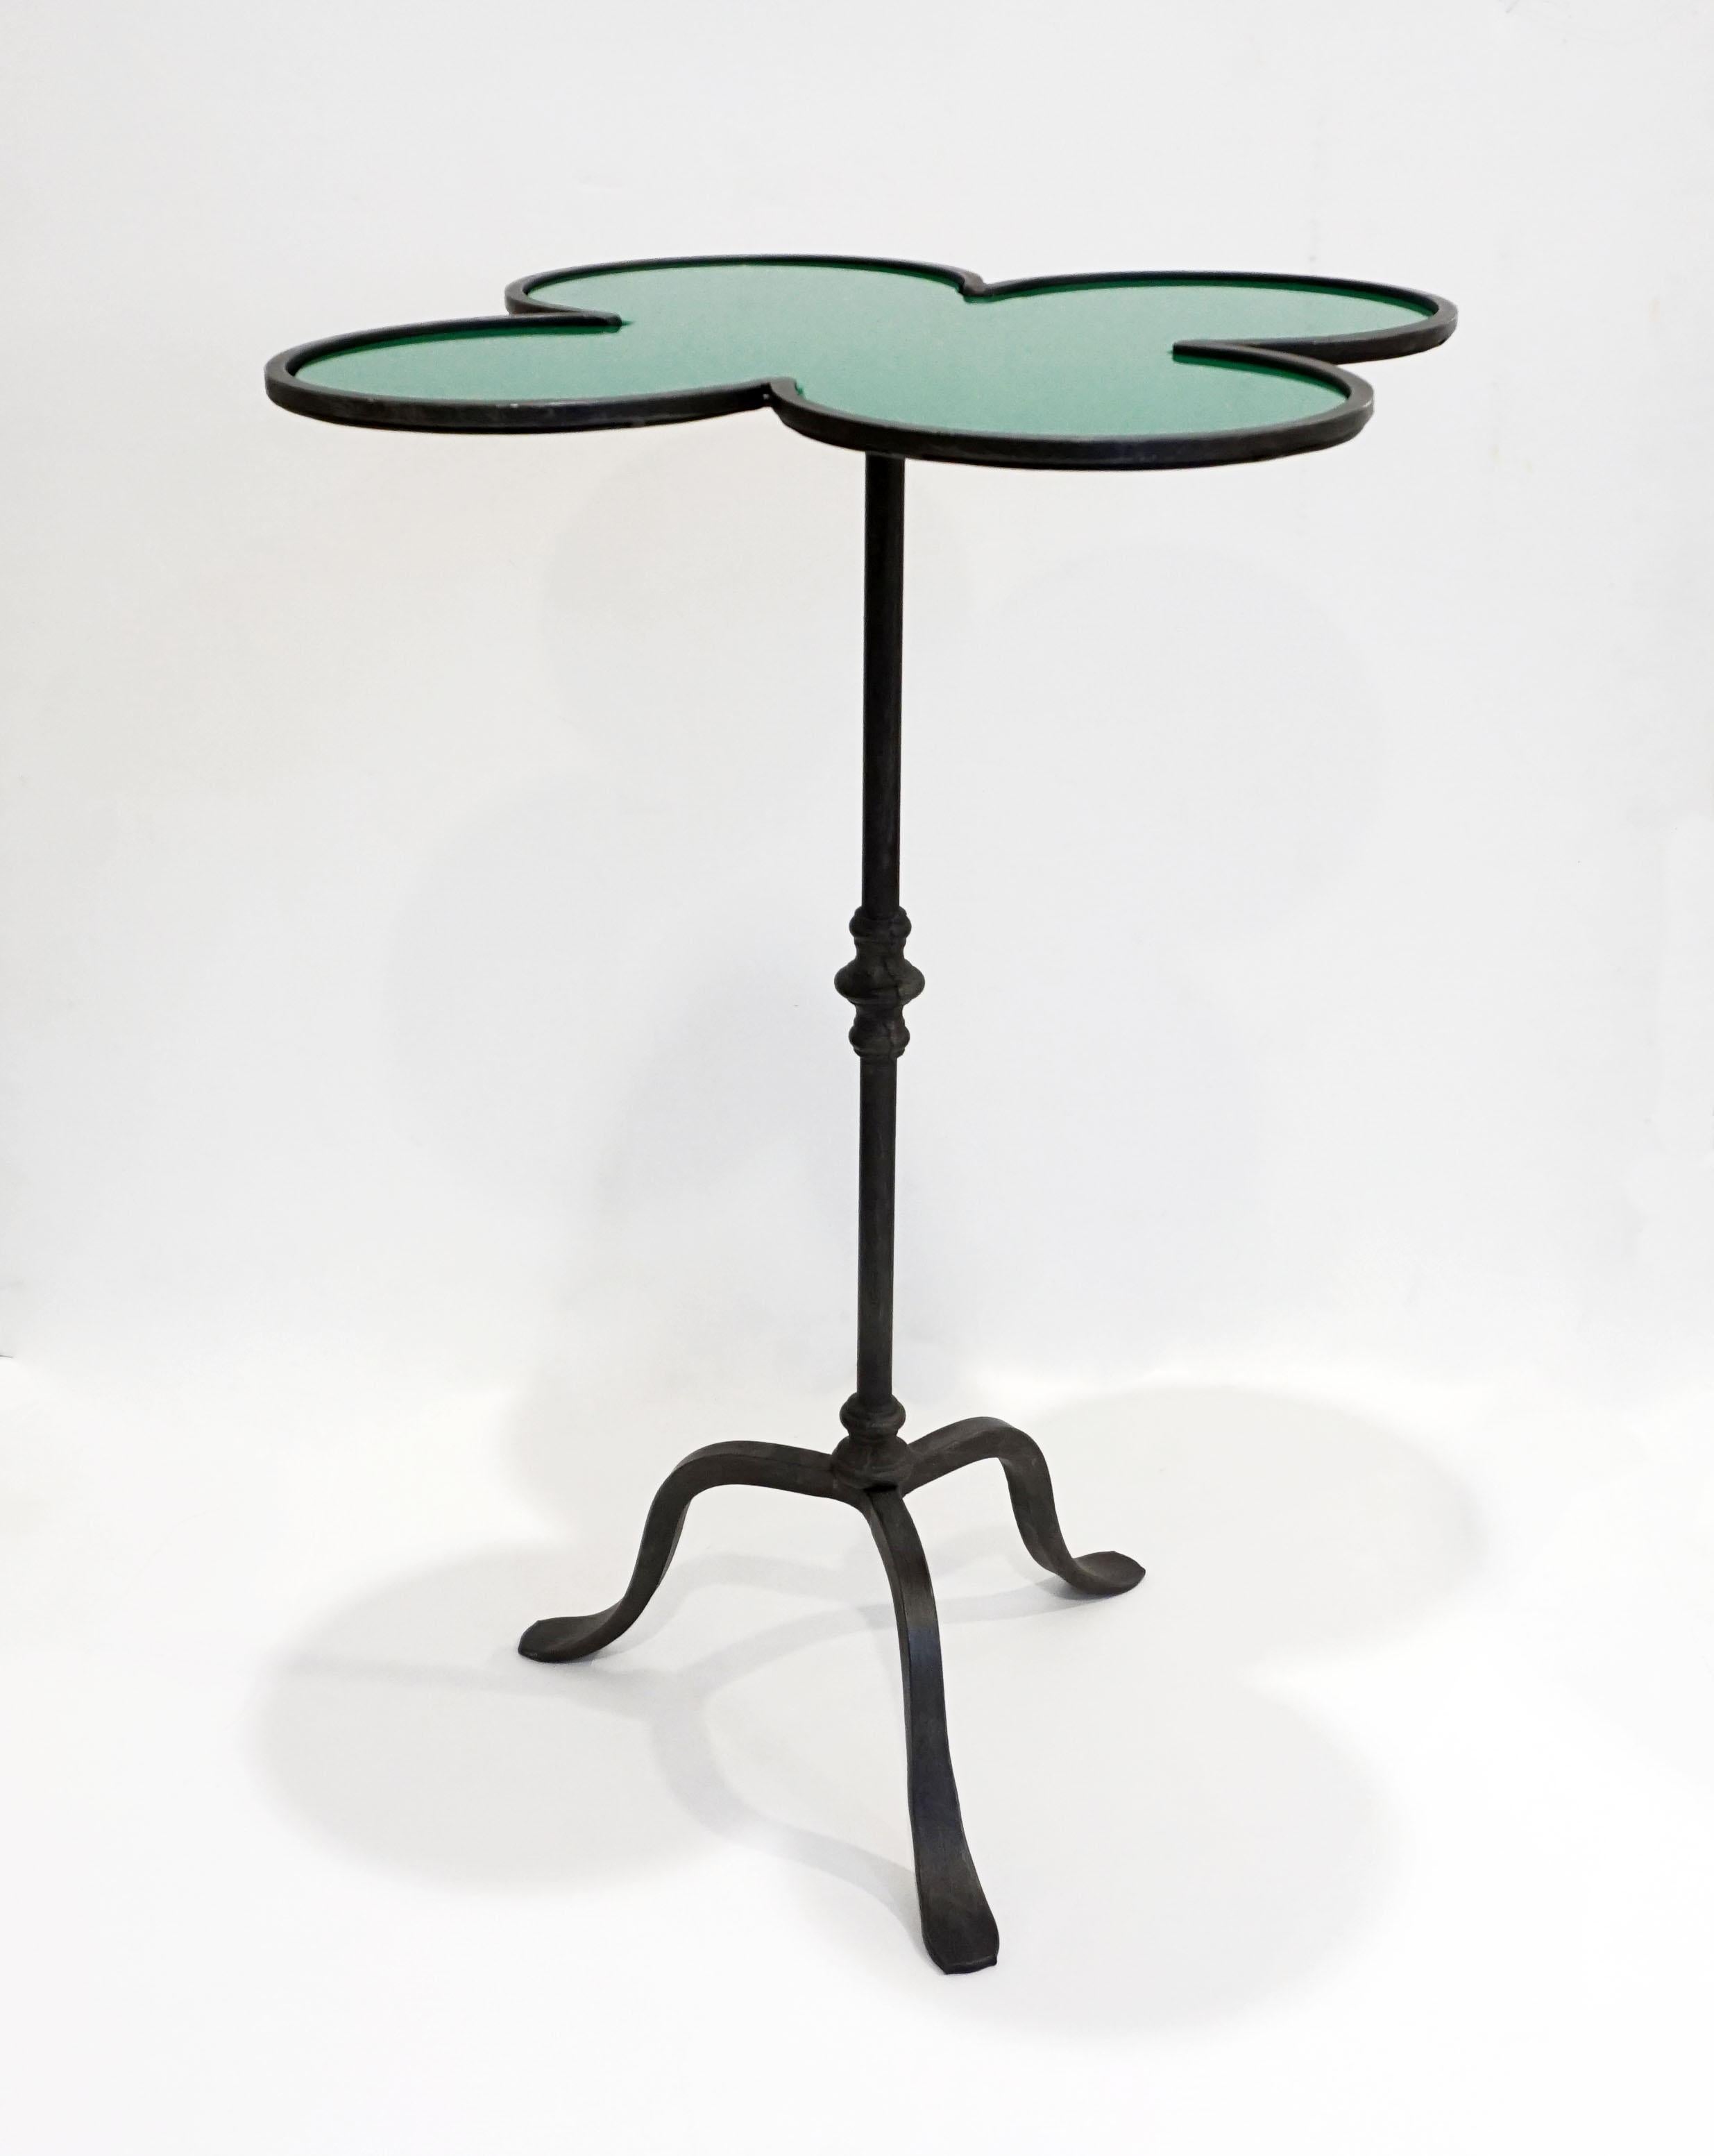 Add fun with color to your environment, outdoor and indoor! This contemporary cast iron side table with a clover-shaped top, entirely handcrafted in Italy, will certainly delight with a glass top customizable in any color of your choice. This